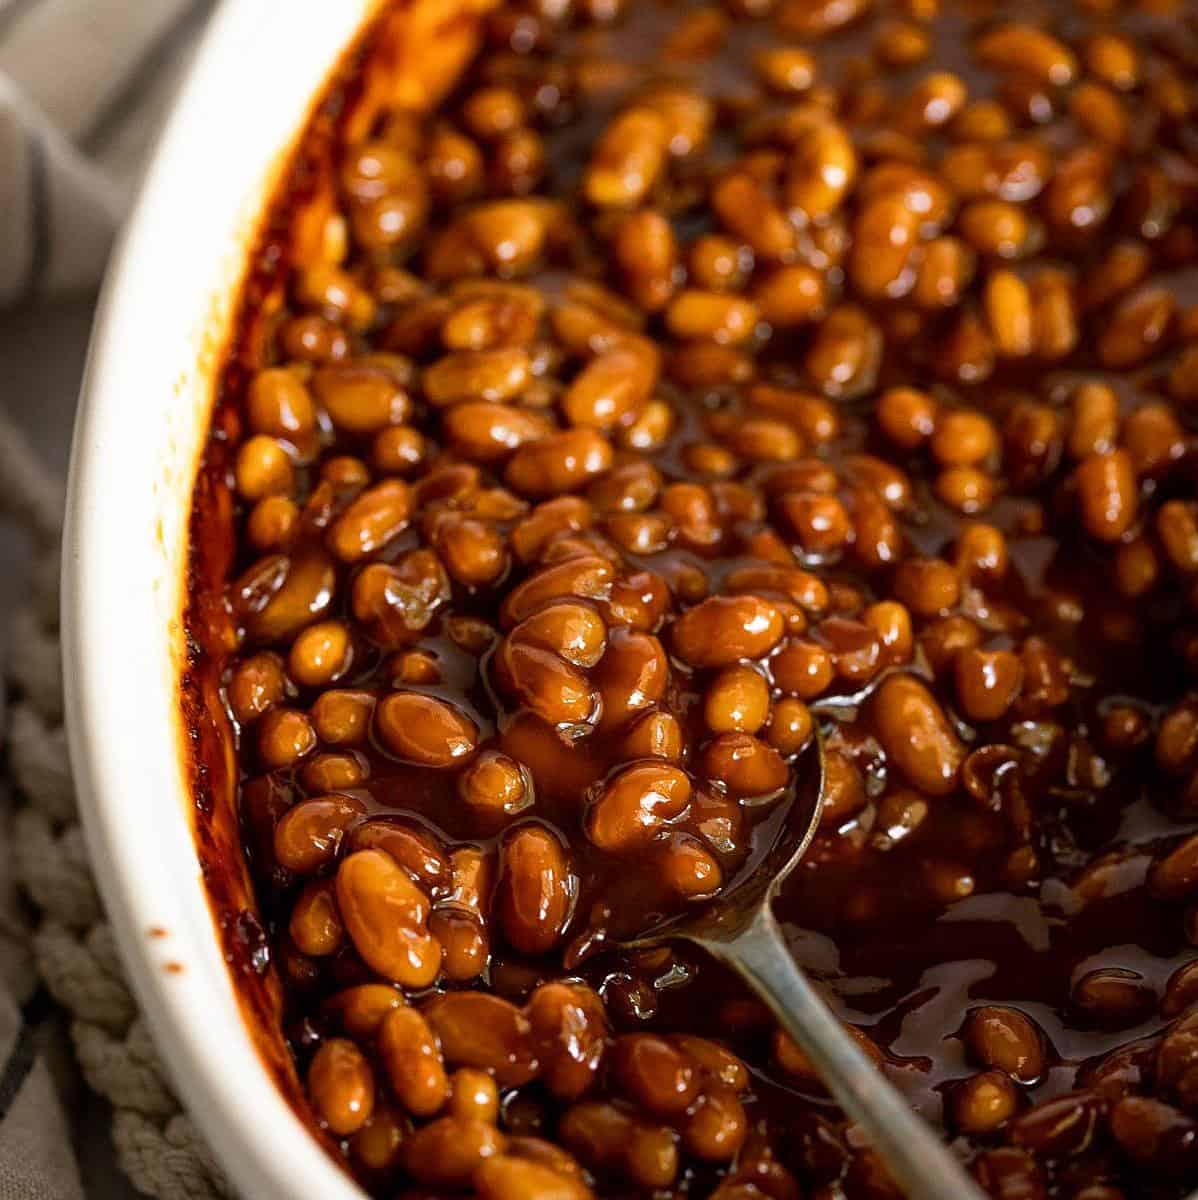  These vegetarian baked beans are packed with protein and fiber, making them a nutritious addition to any meal.